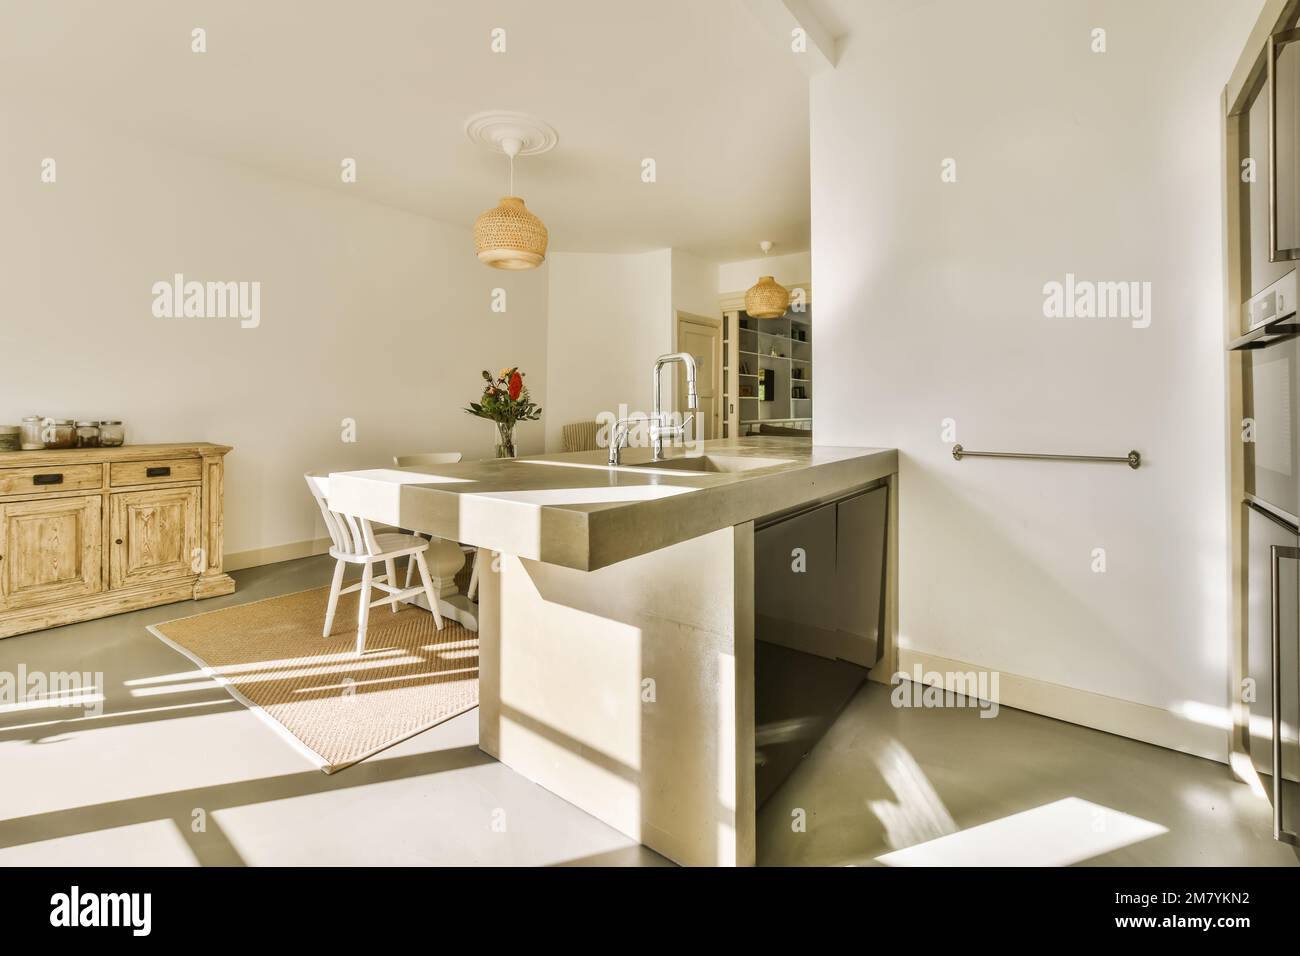 a kitchen and dining area in a house with sunlight shining through the windows on the wall to the room's floor Stock Photo